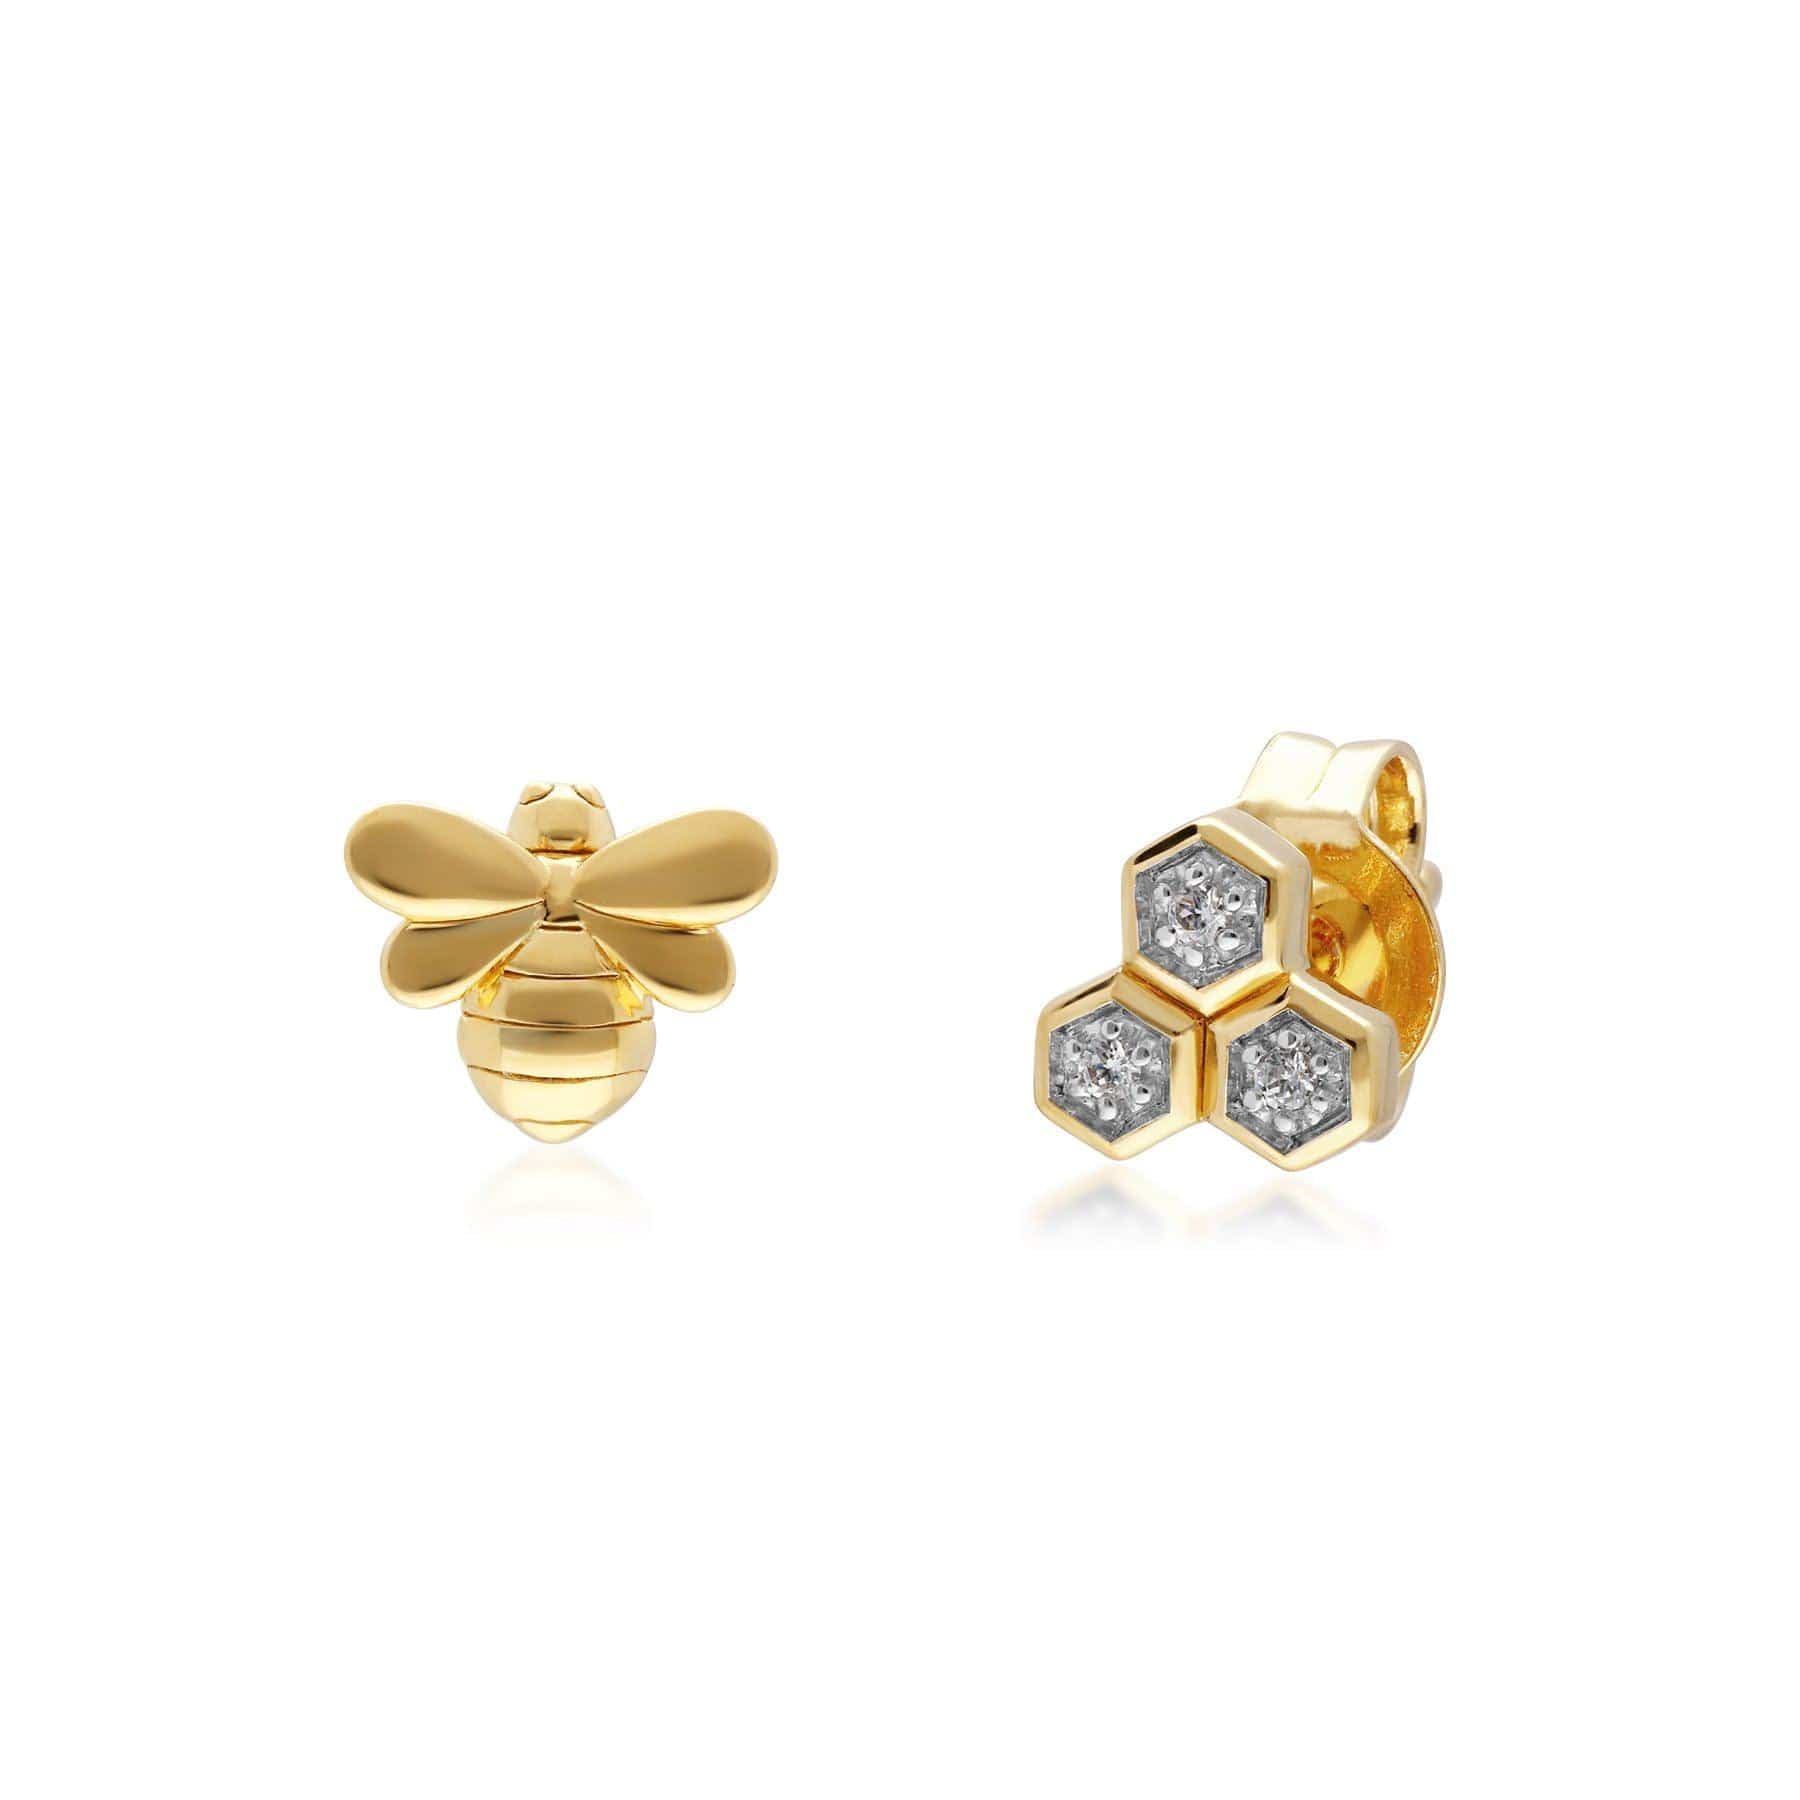 191E0409019 Honeycomb Inspired Mismatched Diamond Bee Earrings in 9ct Yellow Gold 1